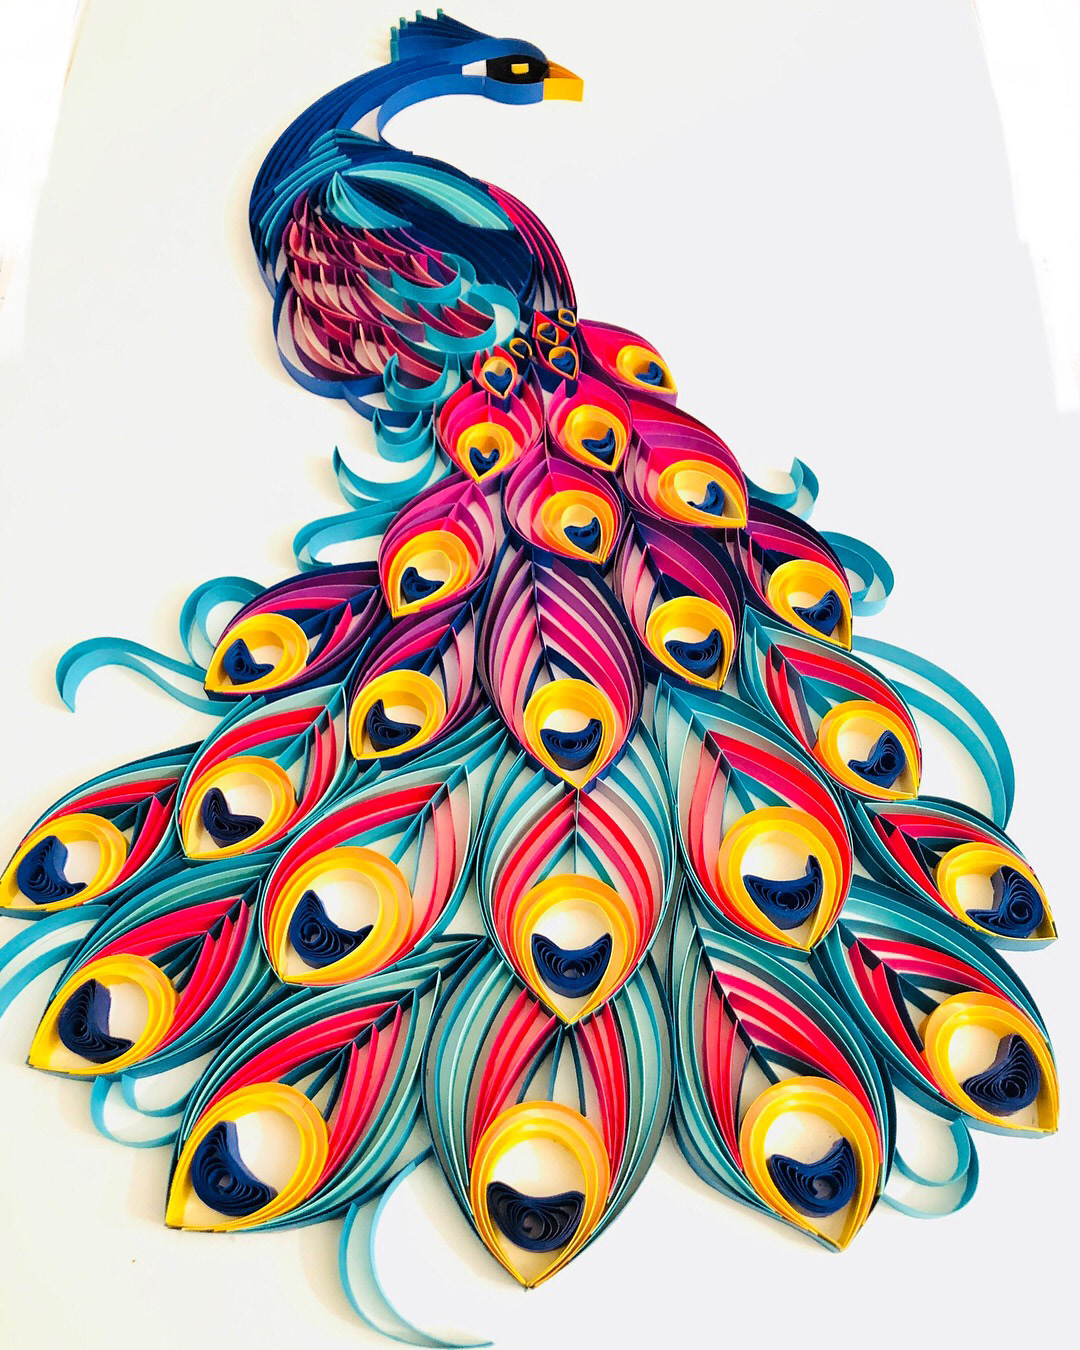 Kaagazbymarlene paperquilling quilling quilledpeacock paperart